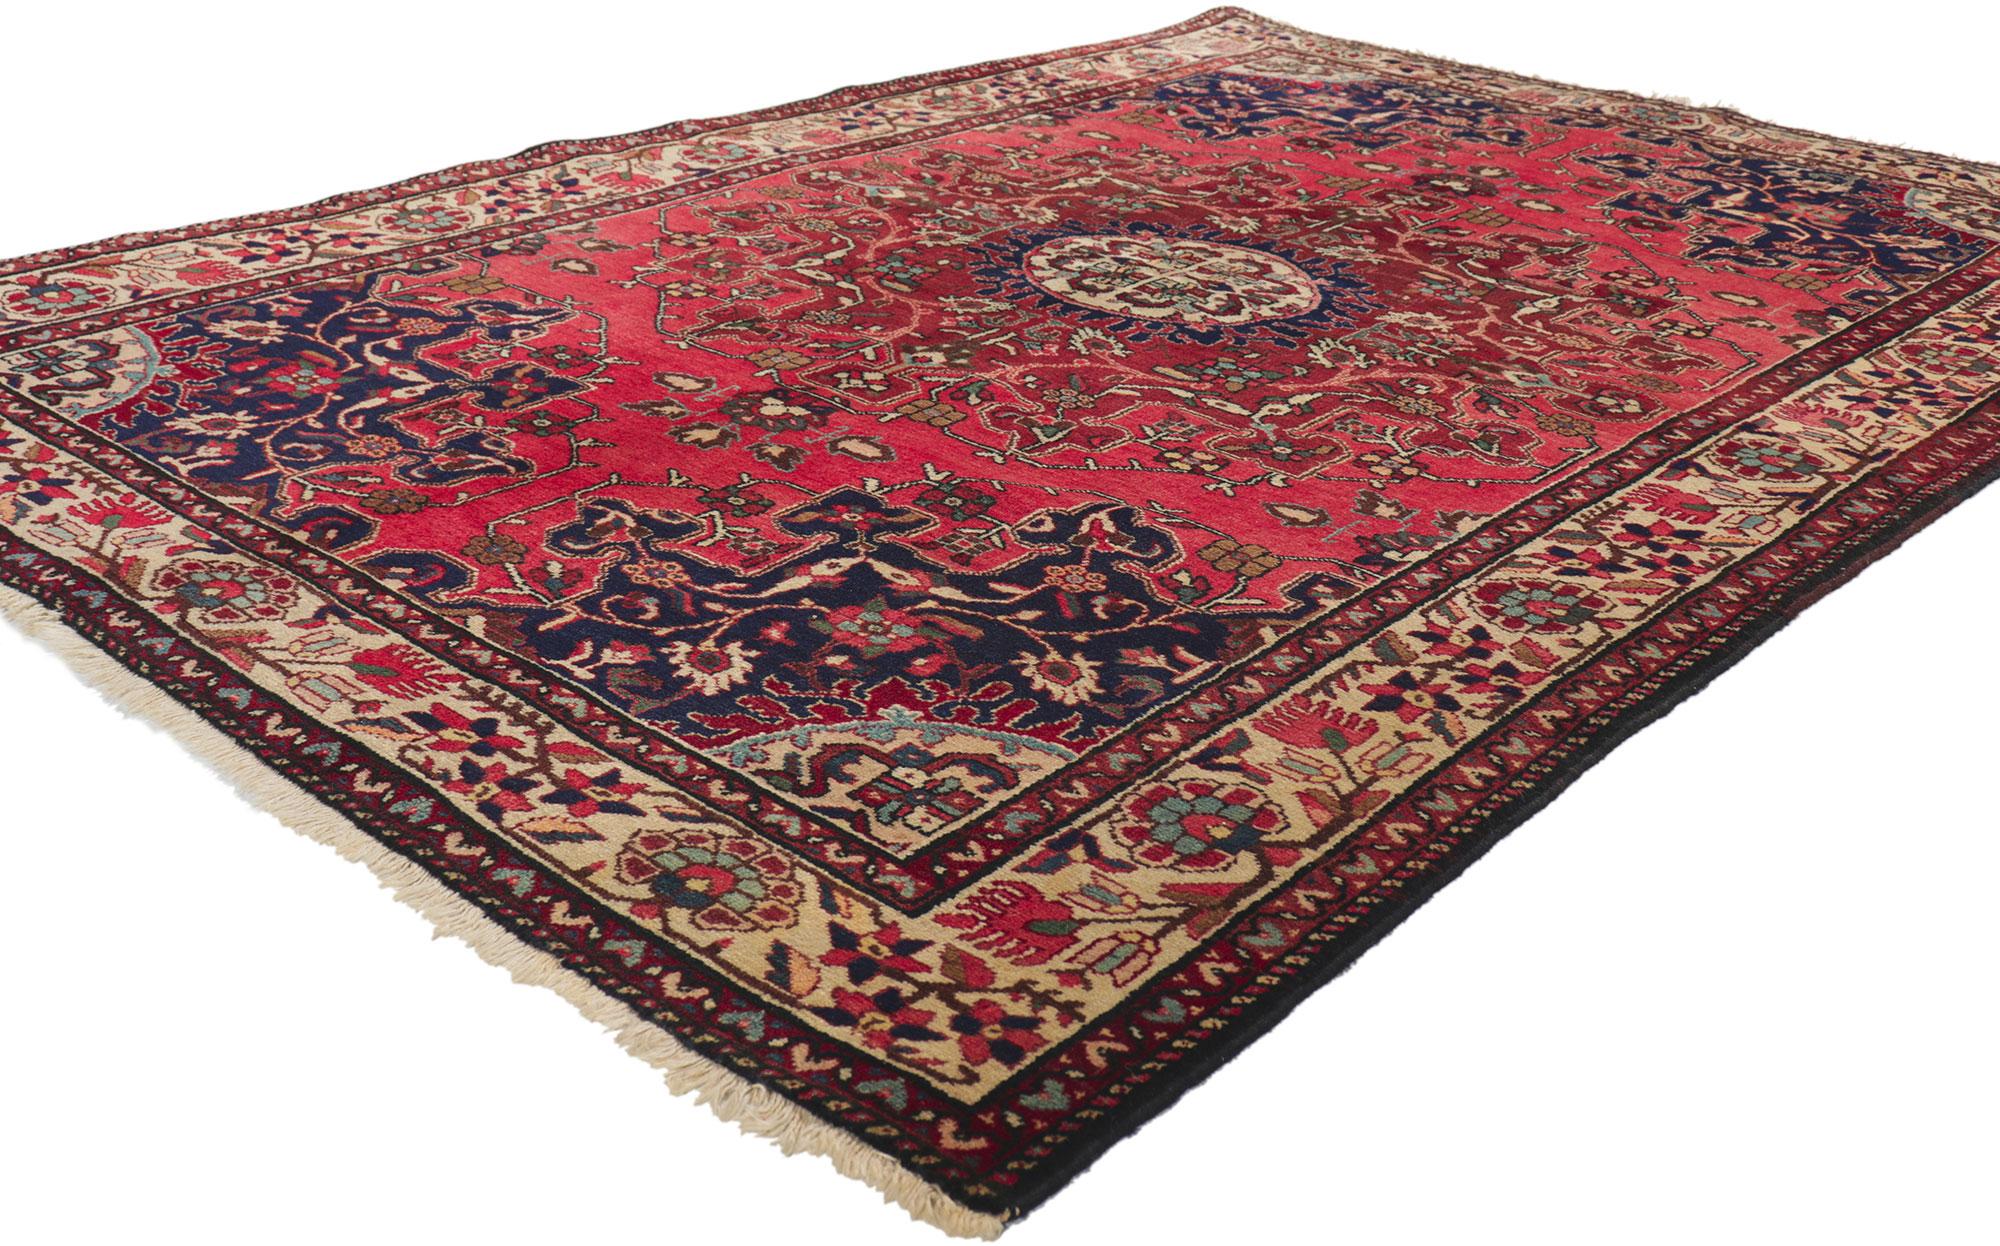 77158 Vintage Persian Hamadan Rug 04'06 x 06'09. 
Emanating traditional style with incredible detail and texture, this hand-knotted wool vintage Persian Hamadan rug is a captivating vision of woven beauty. The intricate botanical design and refined